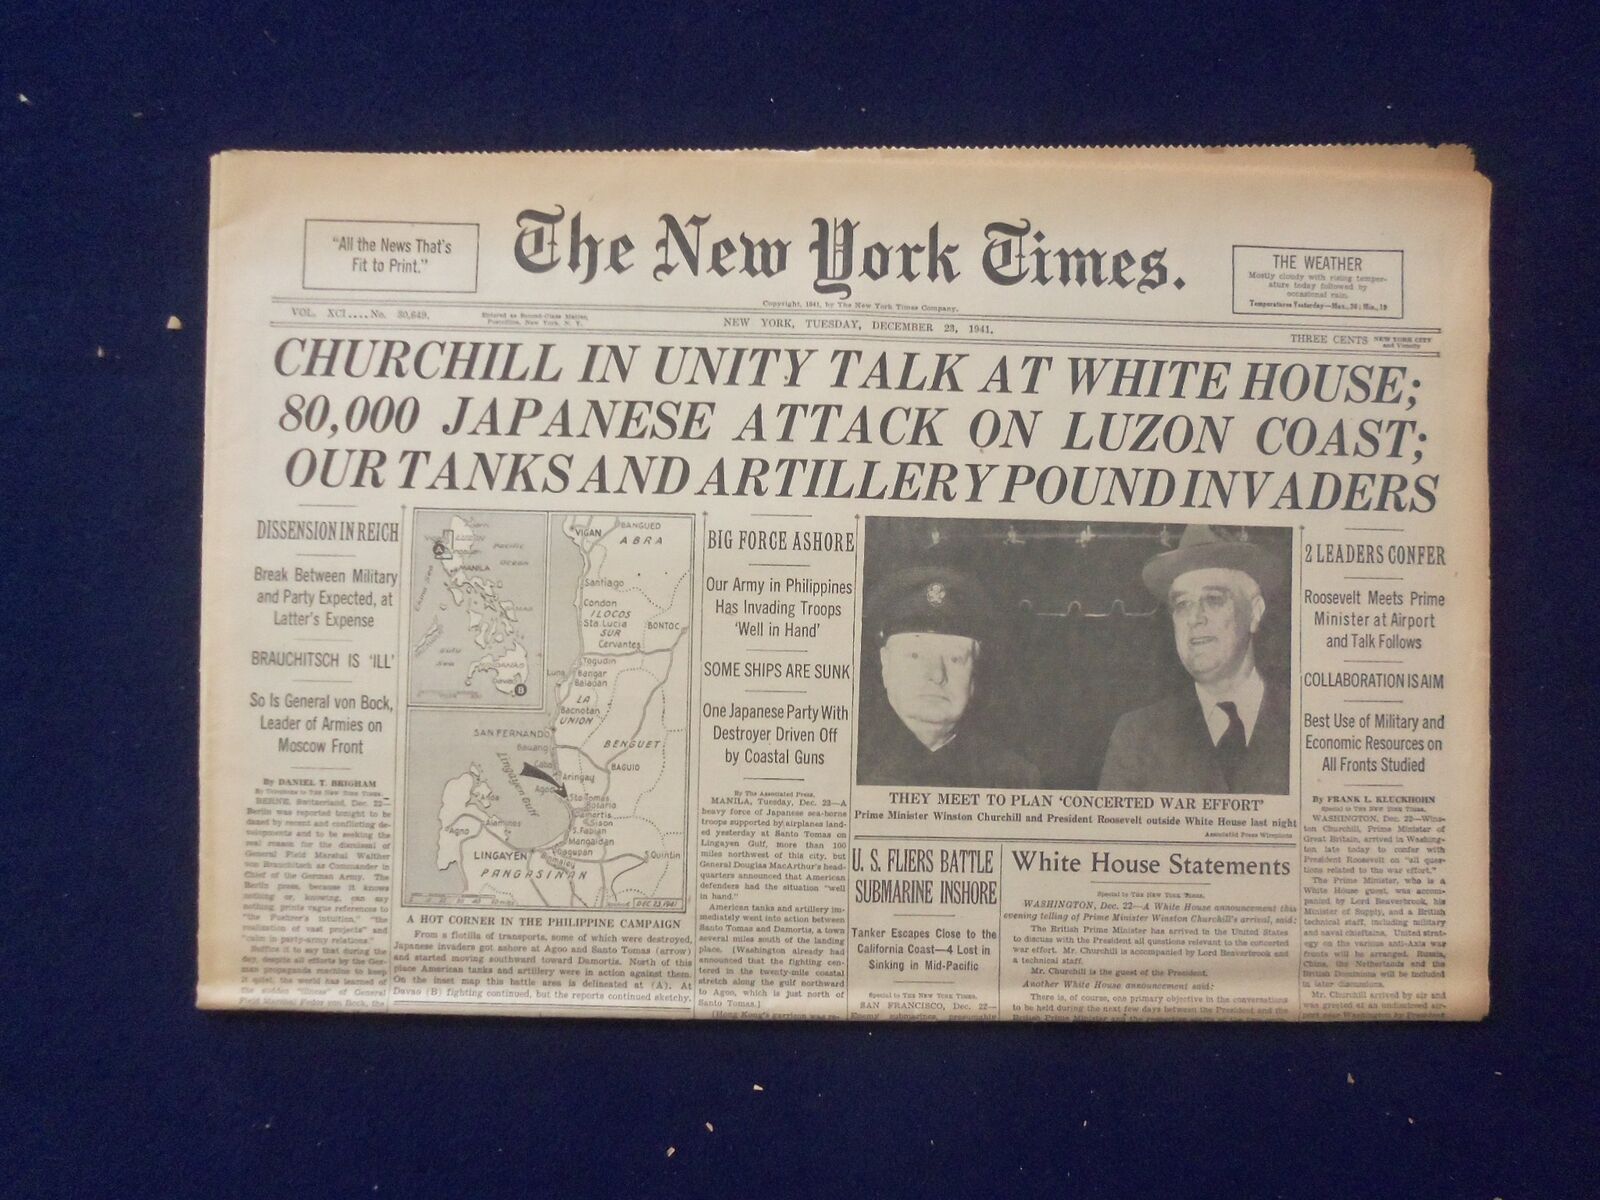 1941 DEC 23 NEW YORK TIMES - CHURCHILL IN UNITY TALK AT WHITE HOUSE - NP 6488